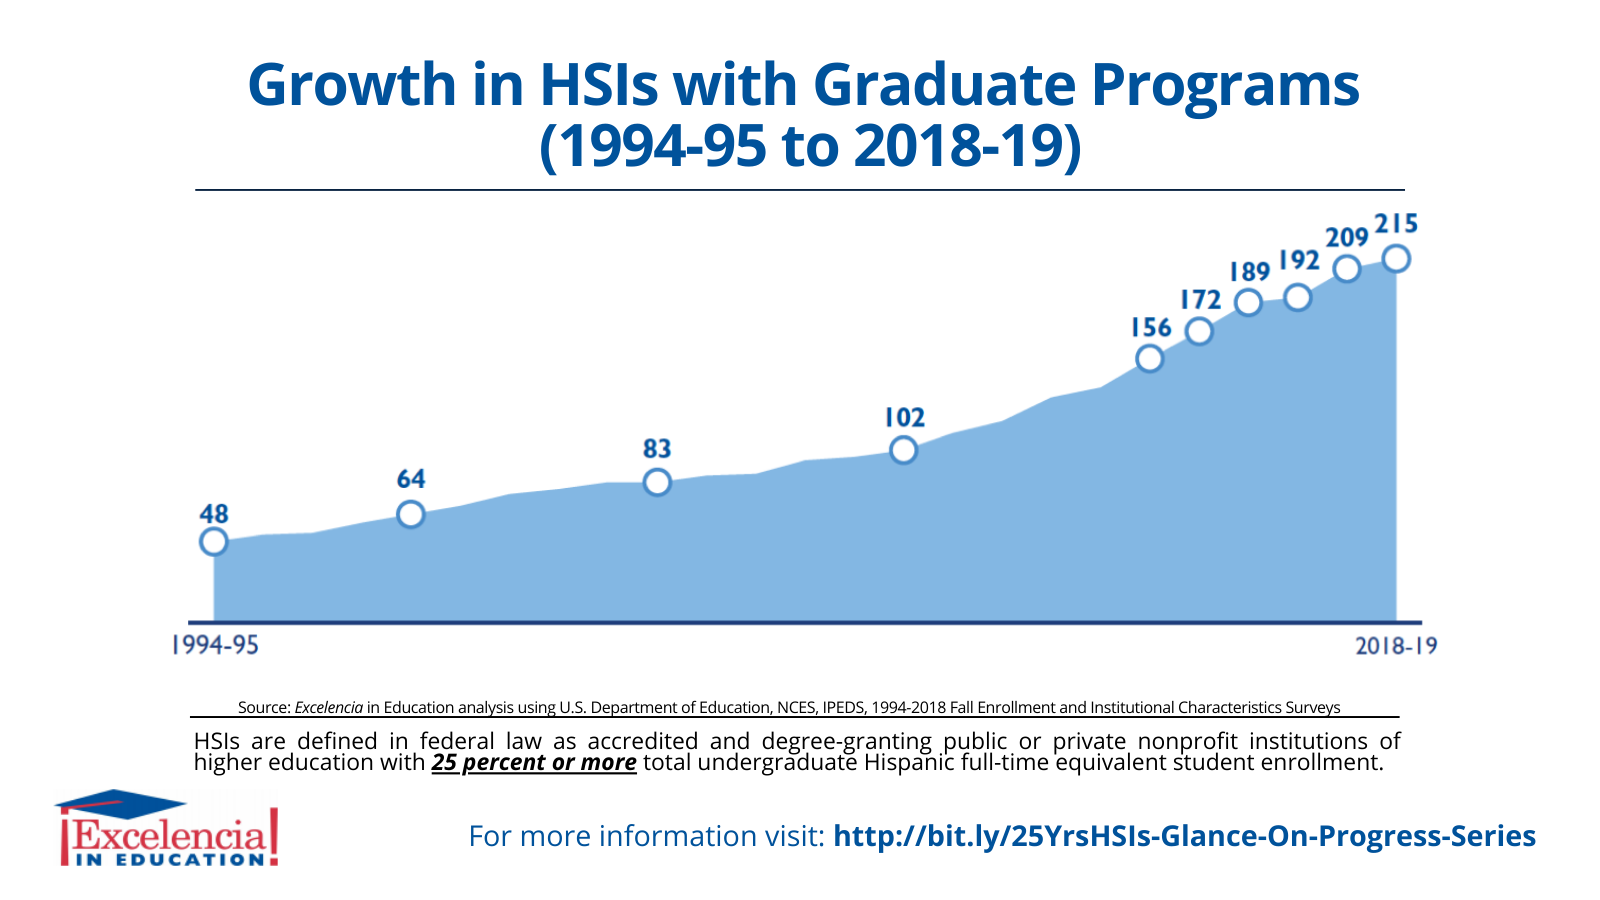 Growth in Hispanic-Serving Institutions (HSIs) Graduate Programs 1994-95 to 2018-19